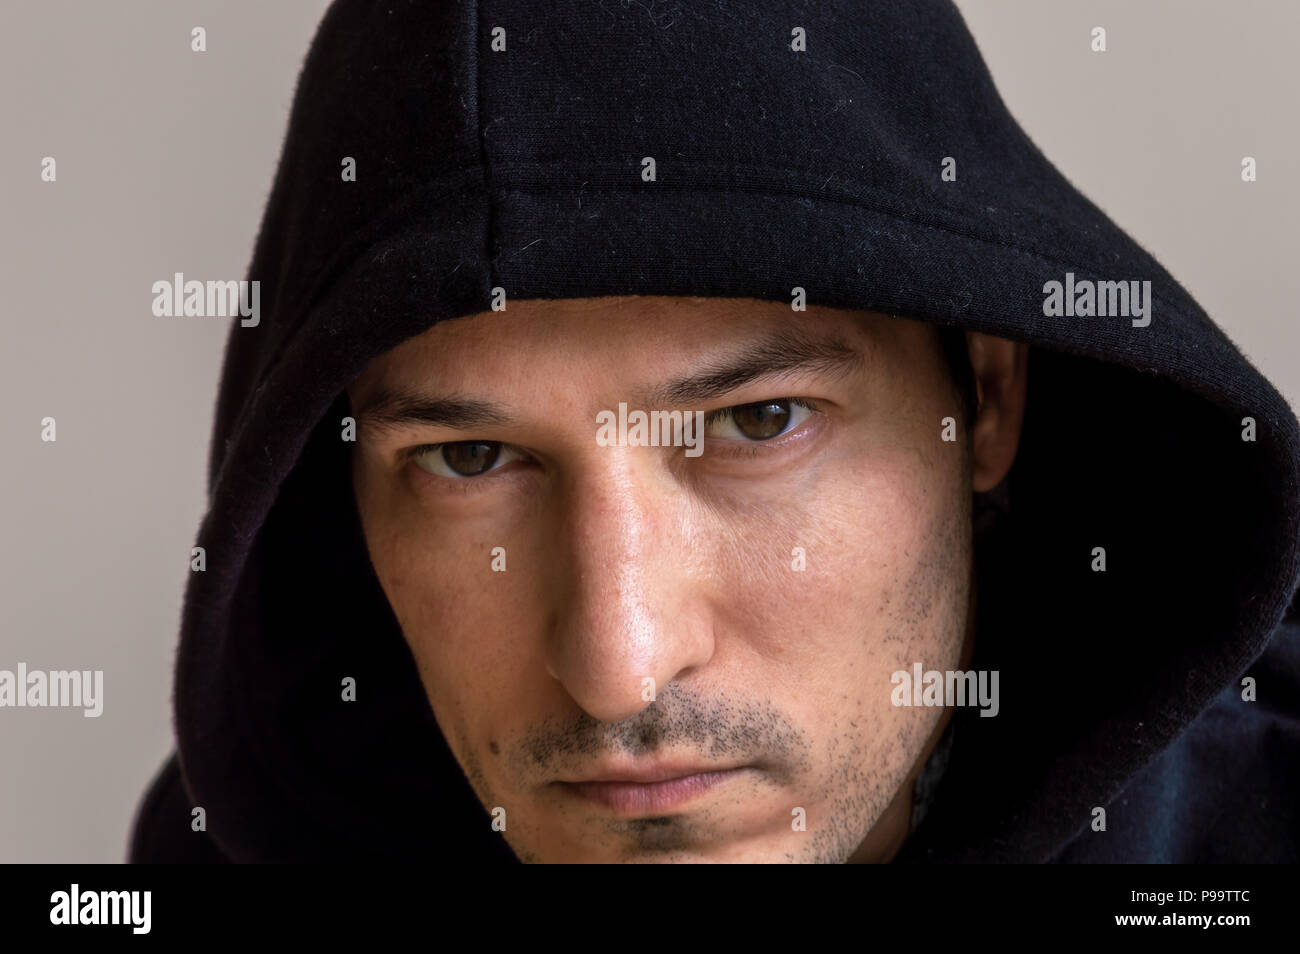 Portrait of an young man with hood Stock Photo